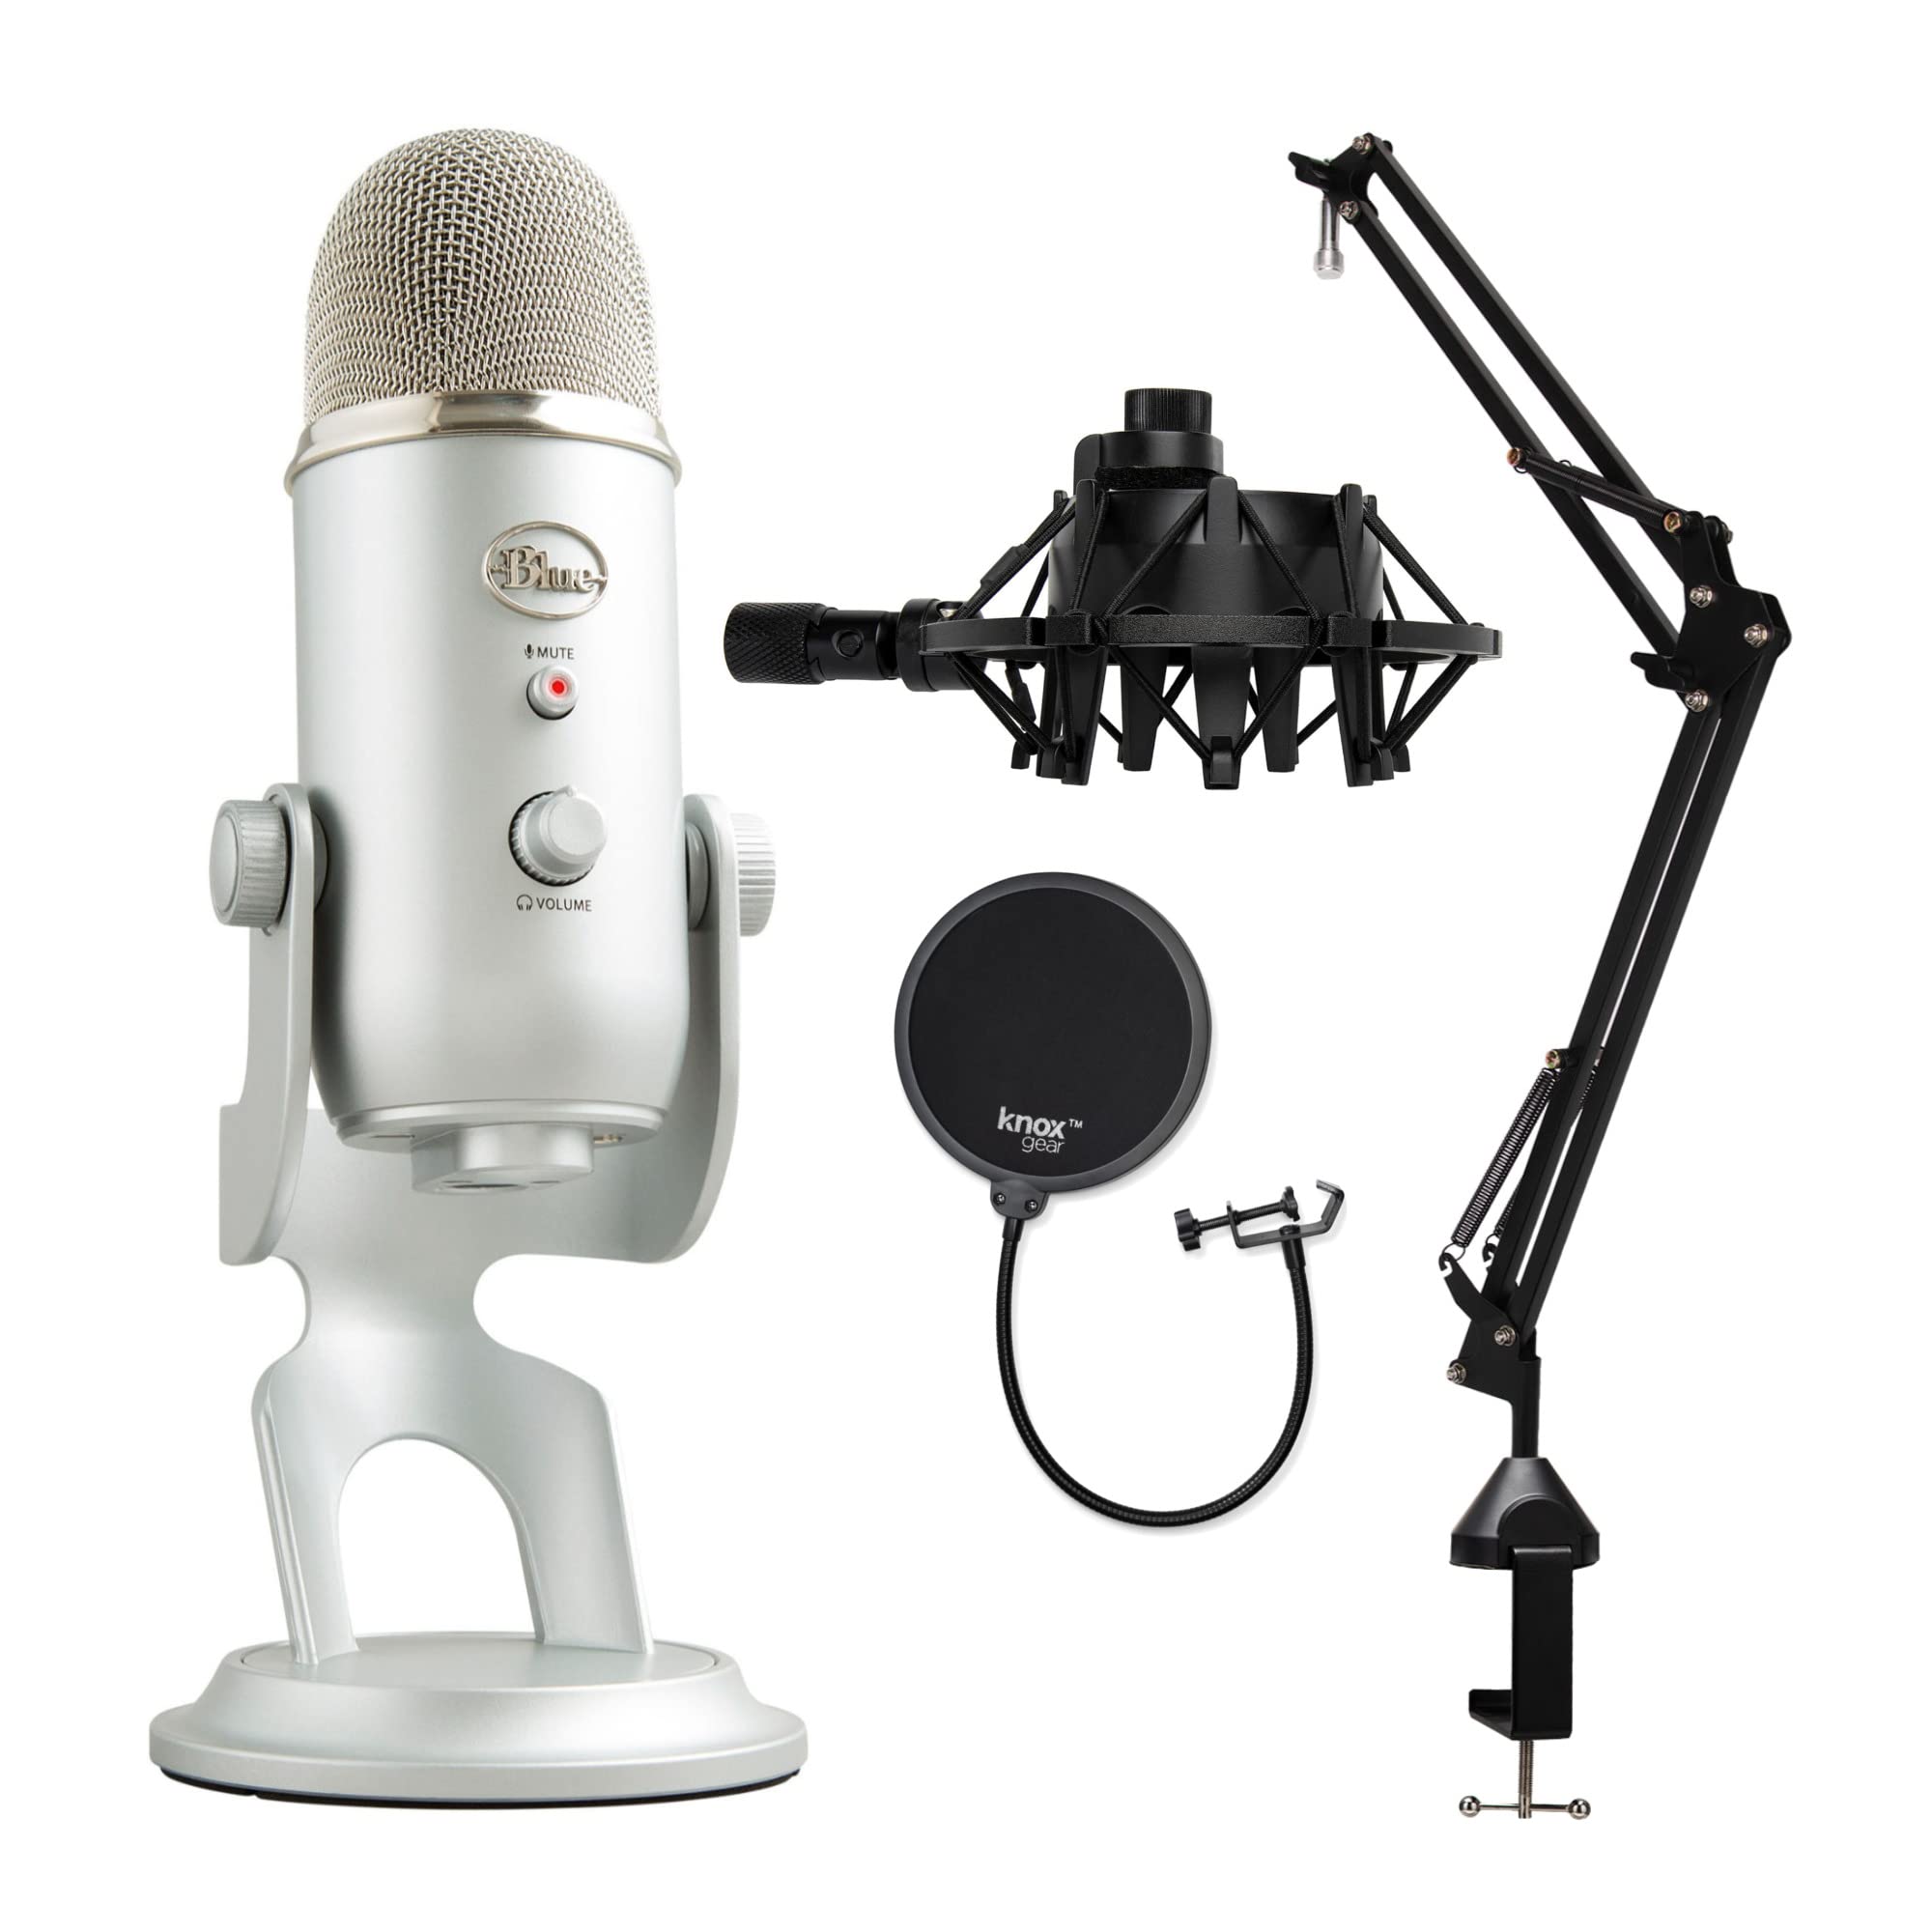 BLUE MICROPHONES Blue Microphone Yeti USB Microphone Bundle with Knox Shock Mount, Studio Stand and Pop Filter (4 Items)